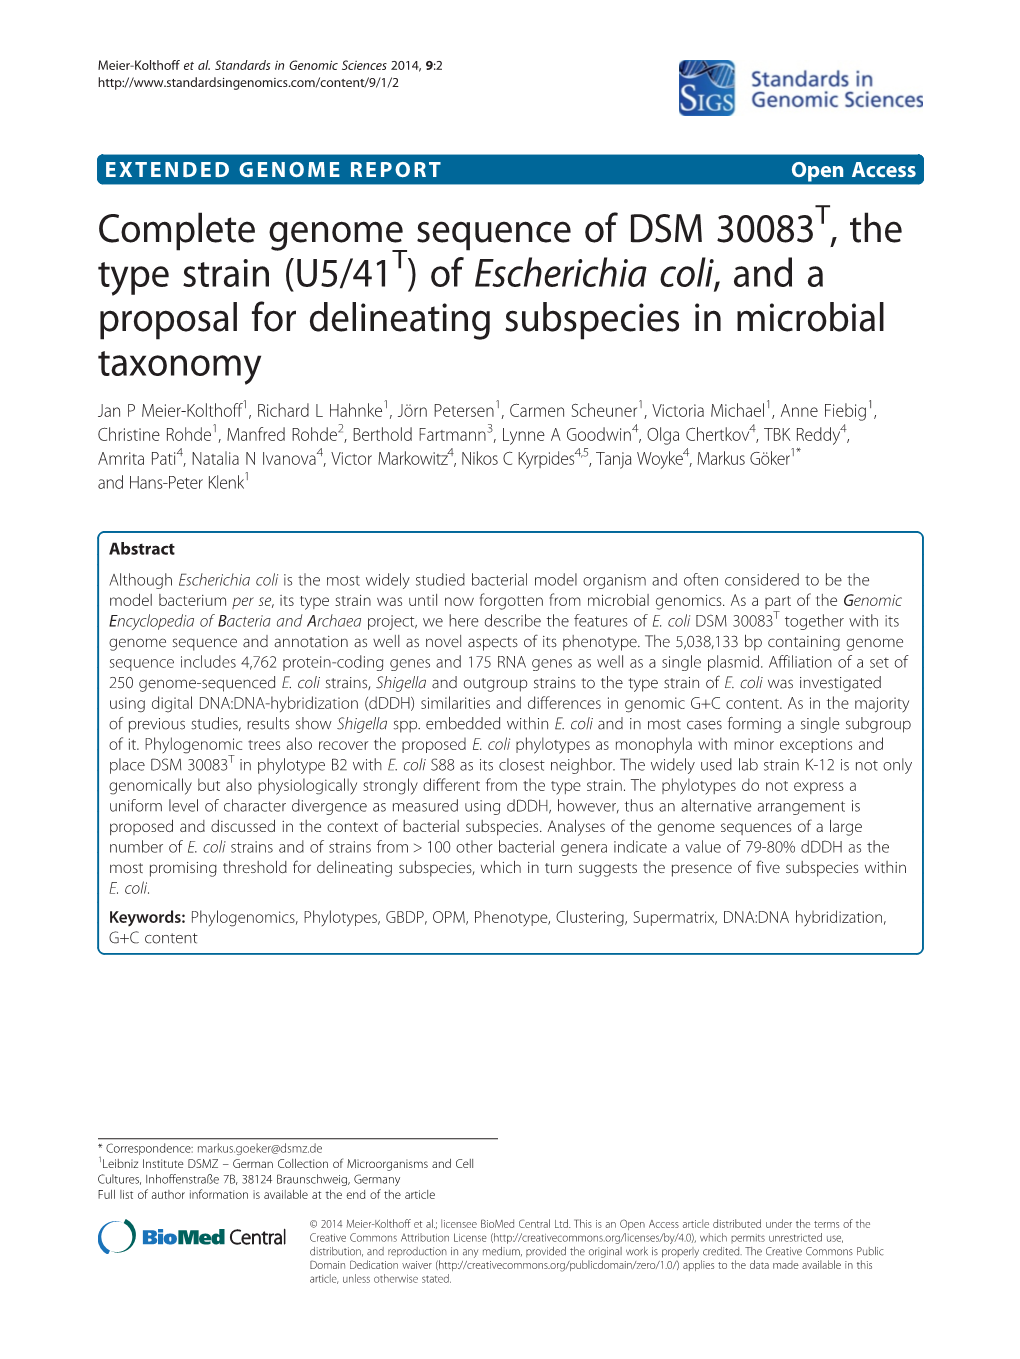 Complete Genome Sequence of DSM 30083 , the Type Strain (U5/41 ) of Escherichia Coli, and a Proposal for Delineating Subspecies